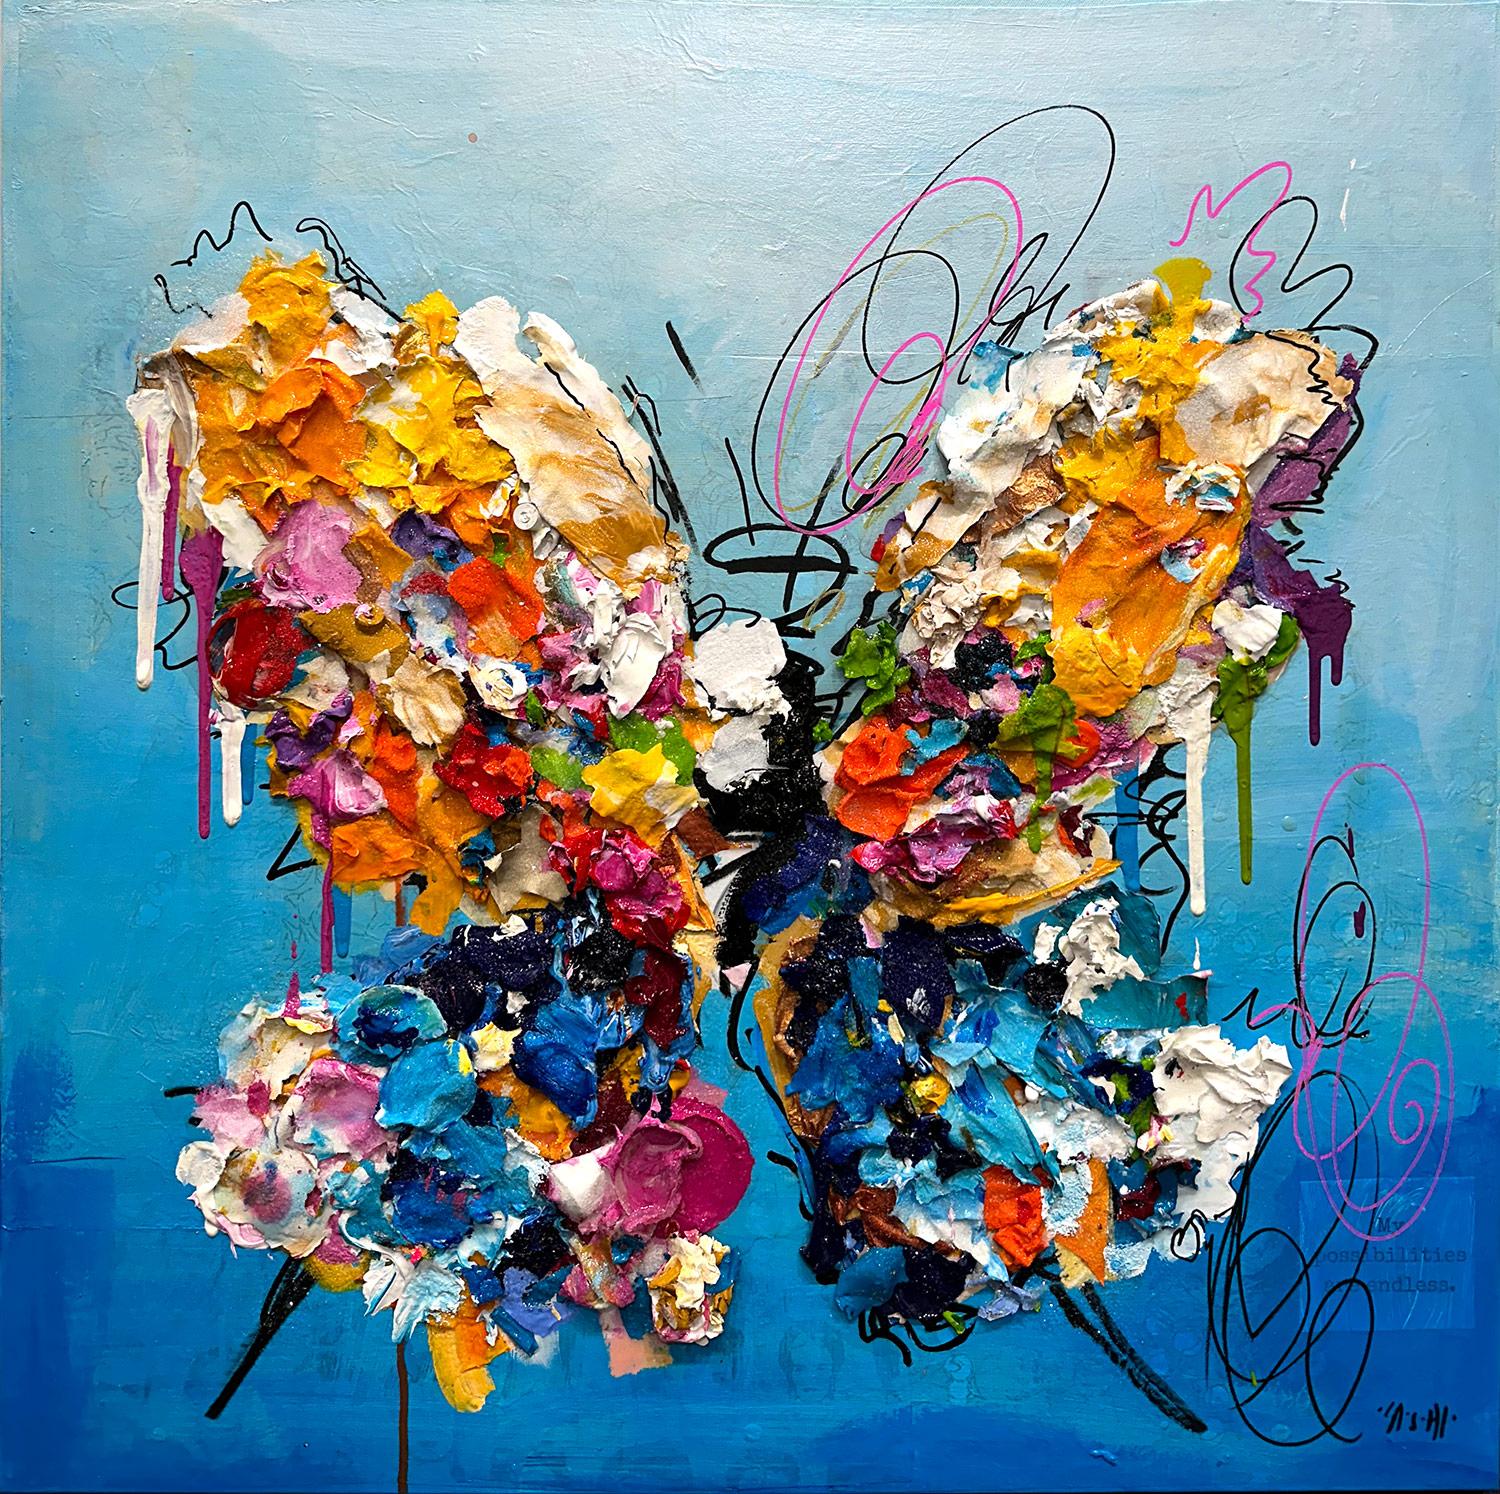 Ash Almonte Figurative Painting - "Bright as the Blue Sky" Colorful Abstract Butterfly Painting Acrylic on Canvas